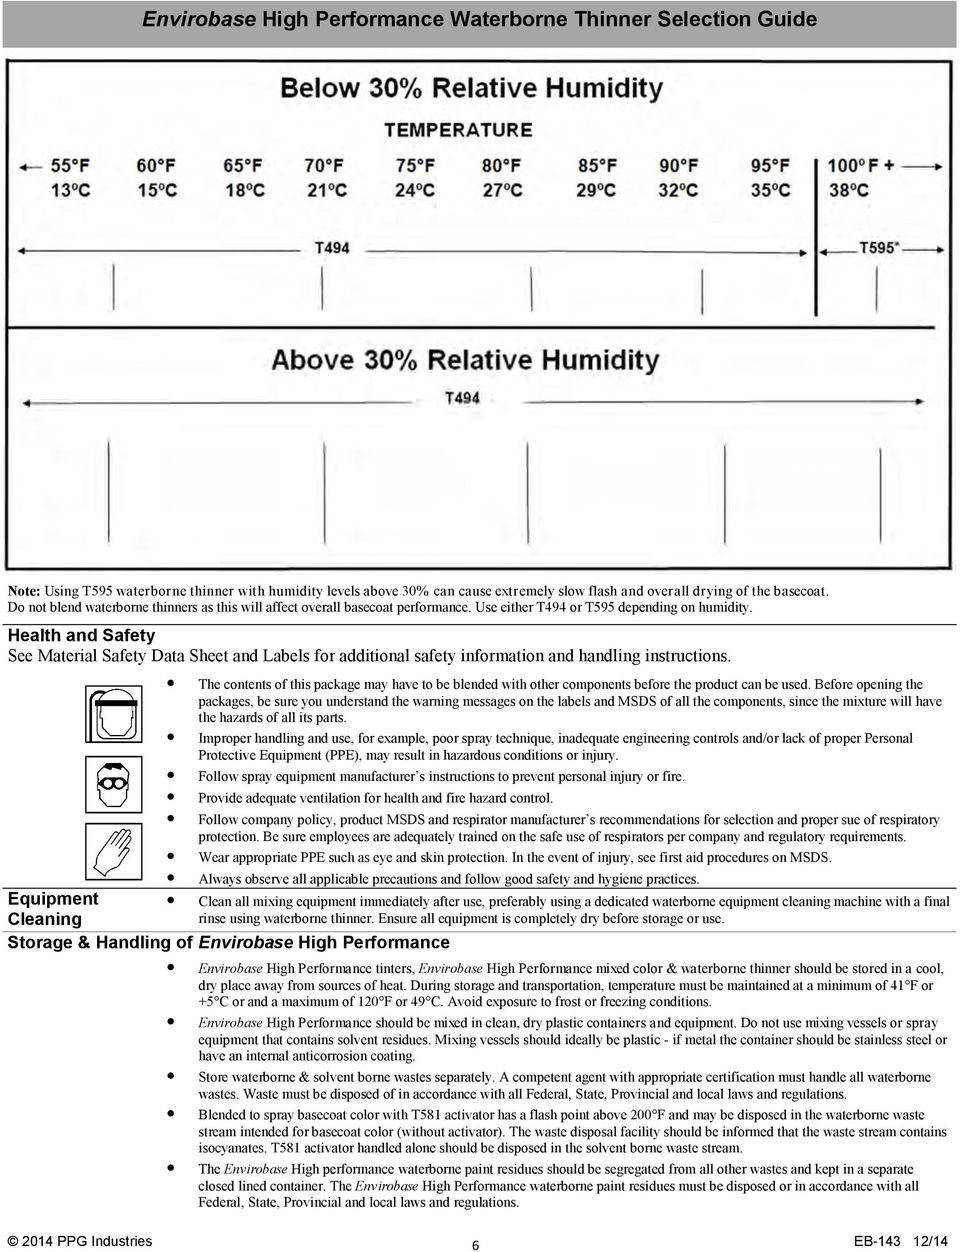 Health and Safety See Material Safety Data Sheet and Labels for additional safety information and handling instructions.